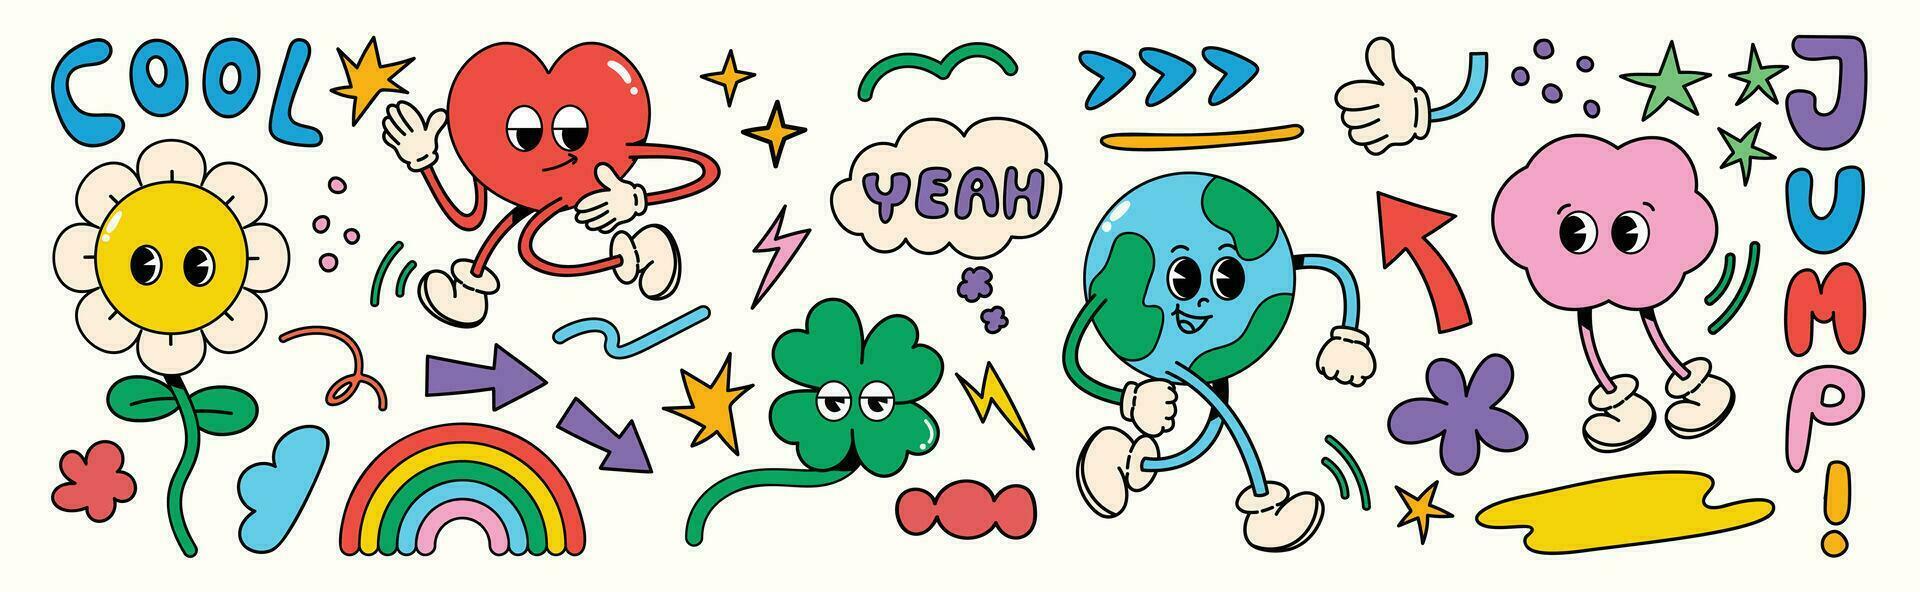 Set of 70s groovy element vector. Collection of cartoon characters, doodle smile face, world, rainbow, flower, heart, cloud, ginkgo leaf. Cute retro groovy hippie design for decorative, sticker, kids. vector